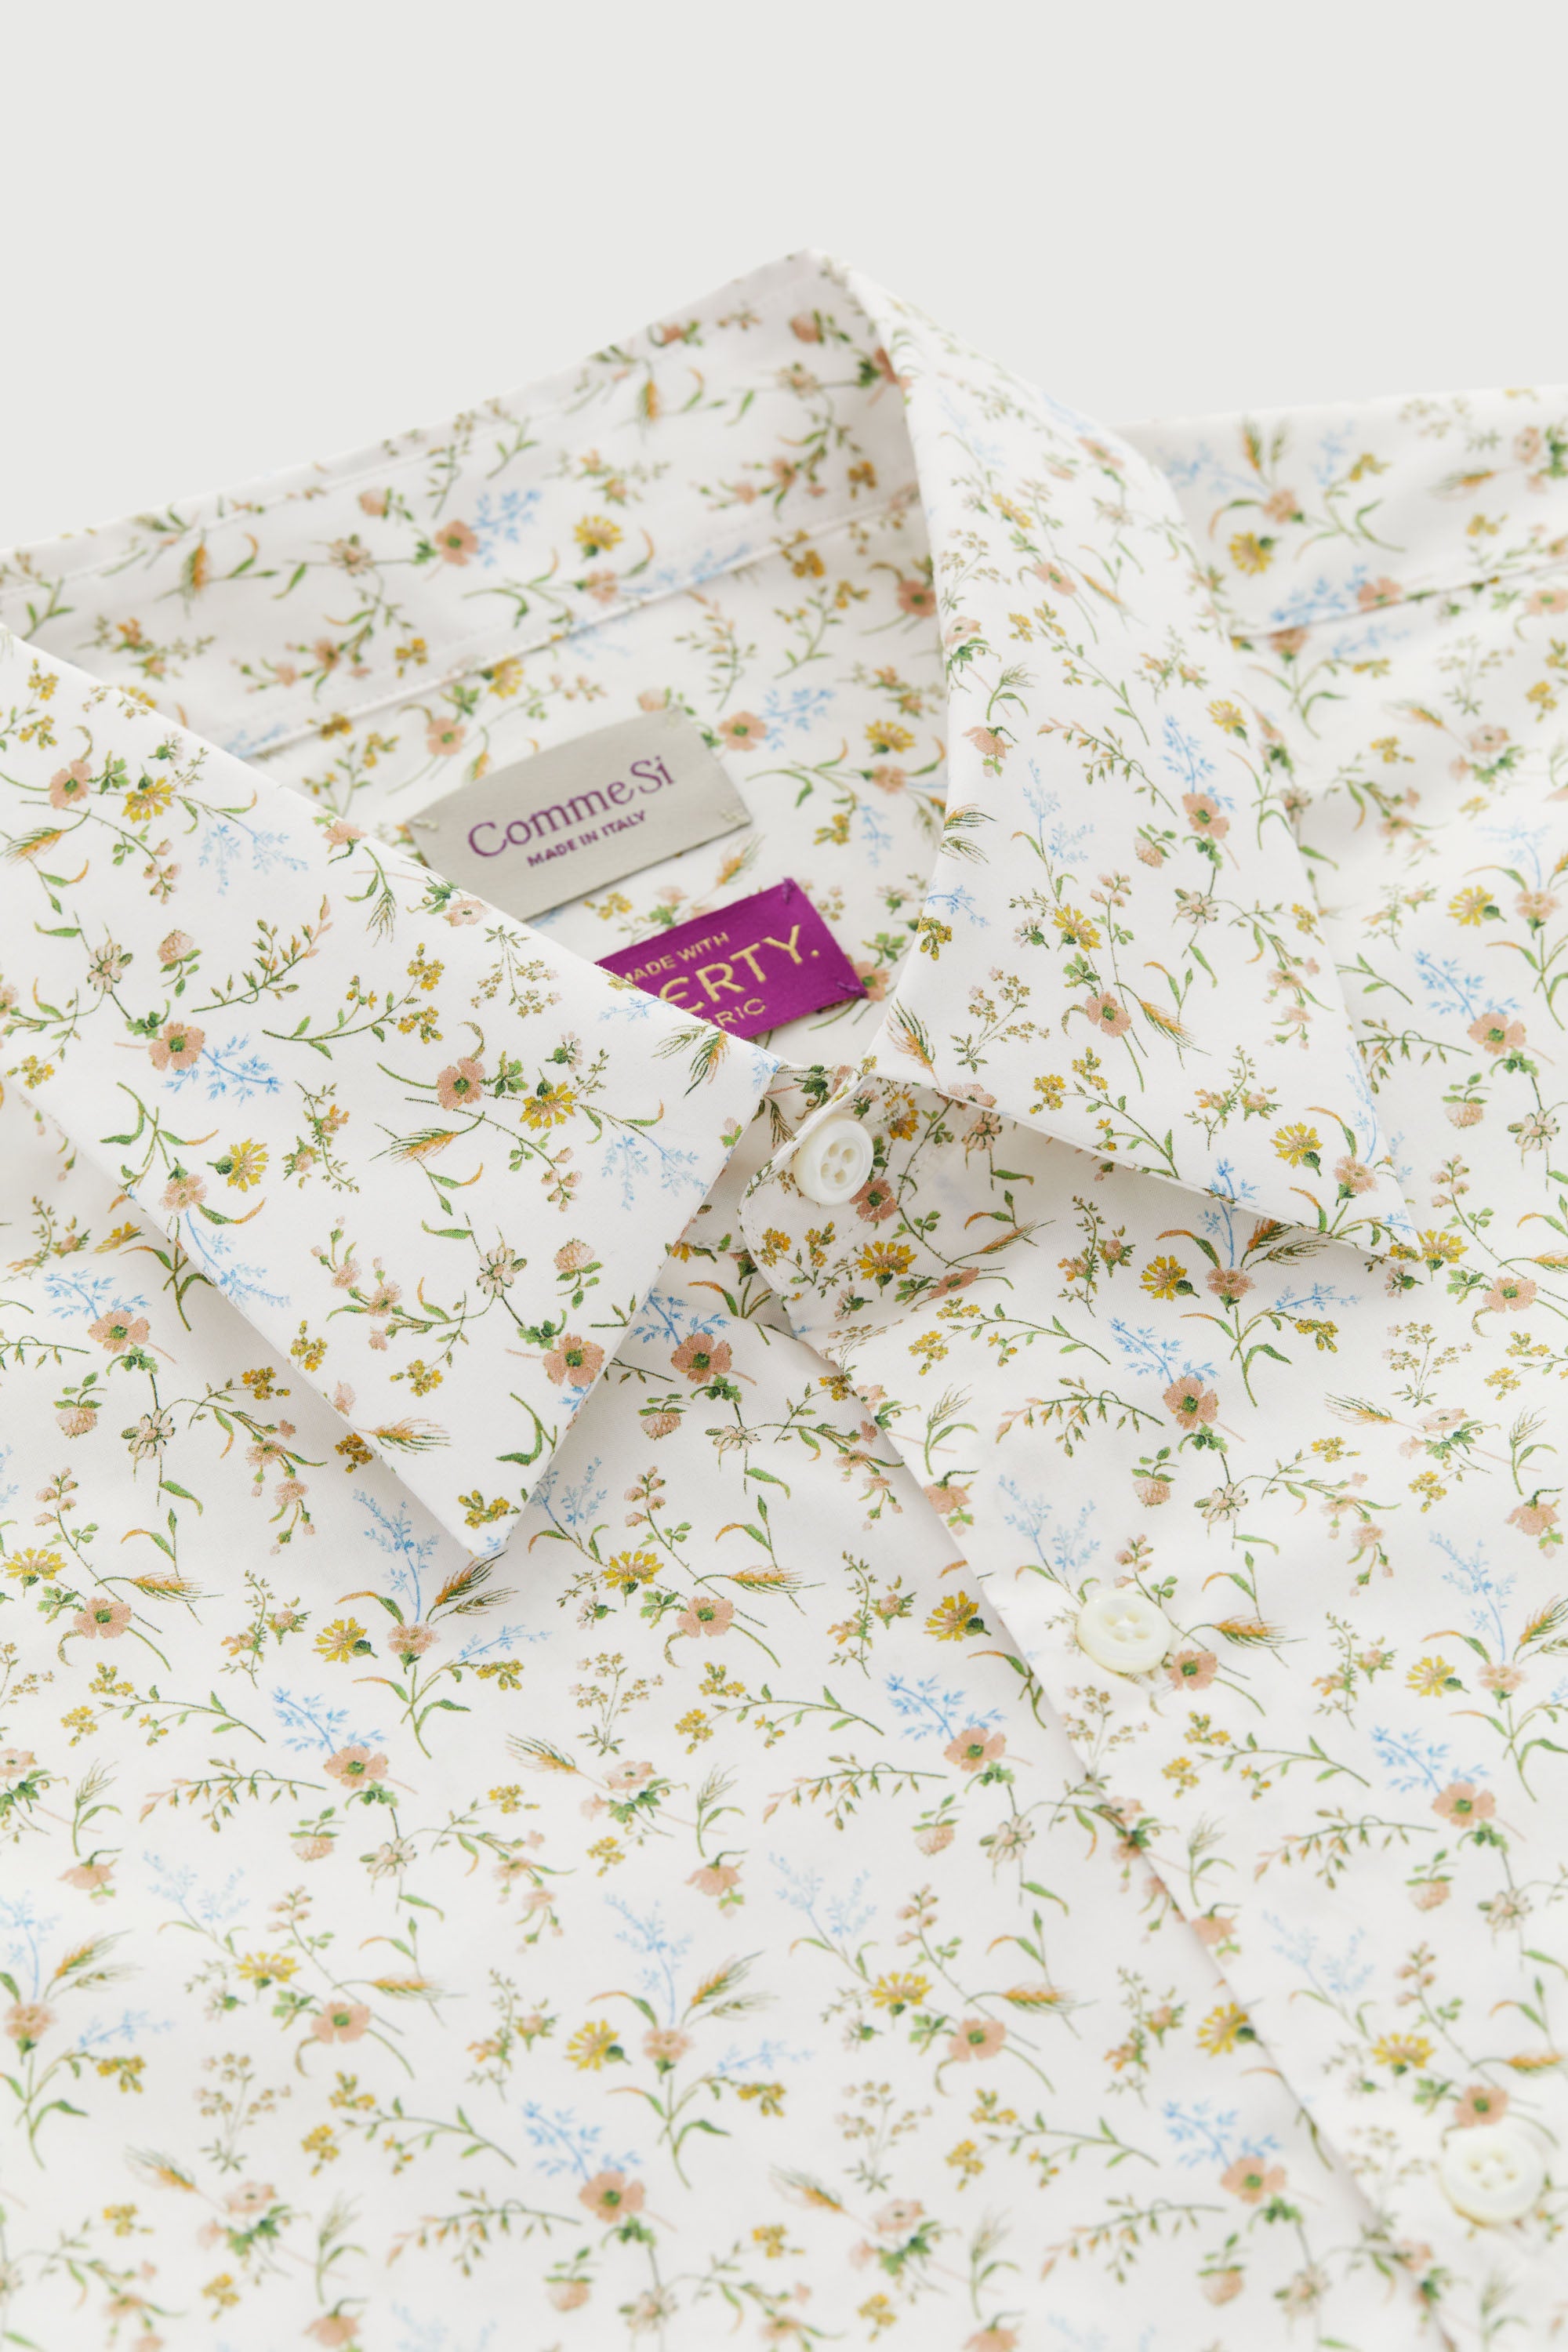 La Shirt Classica, made with Liberty fabric